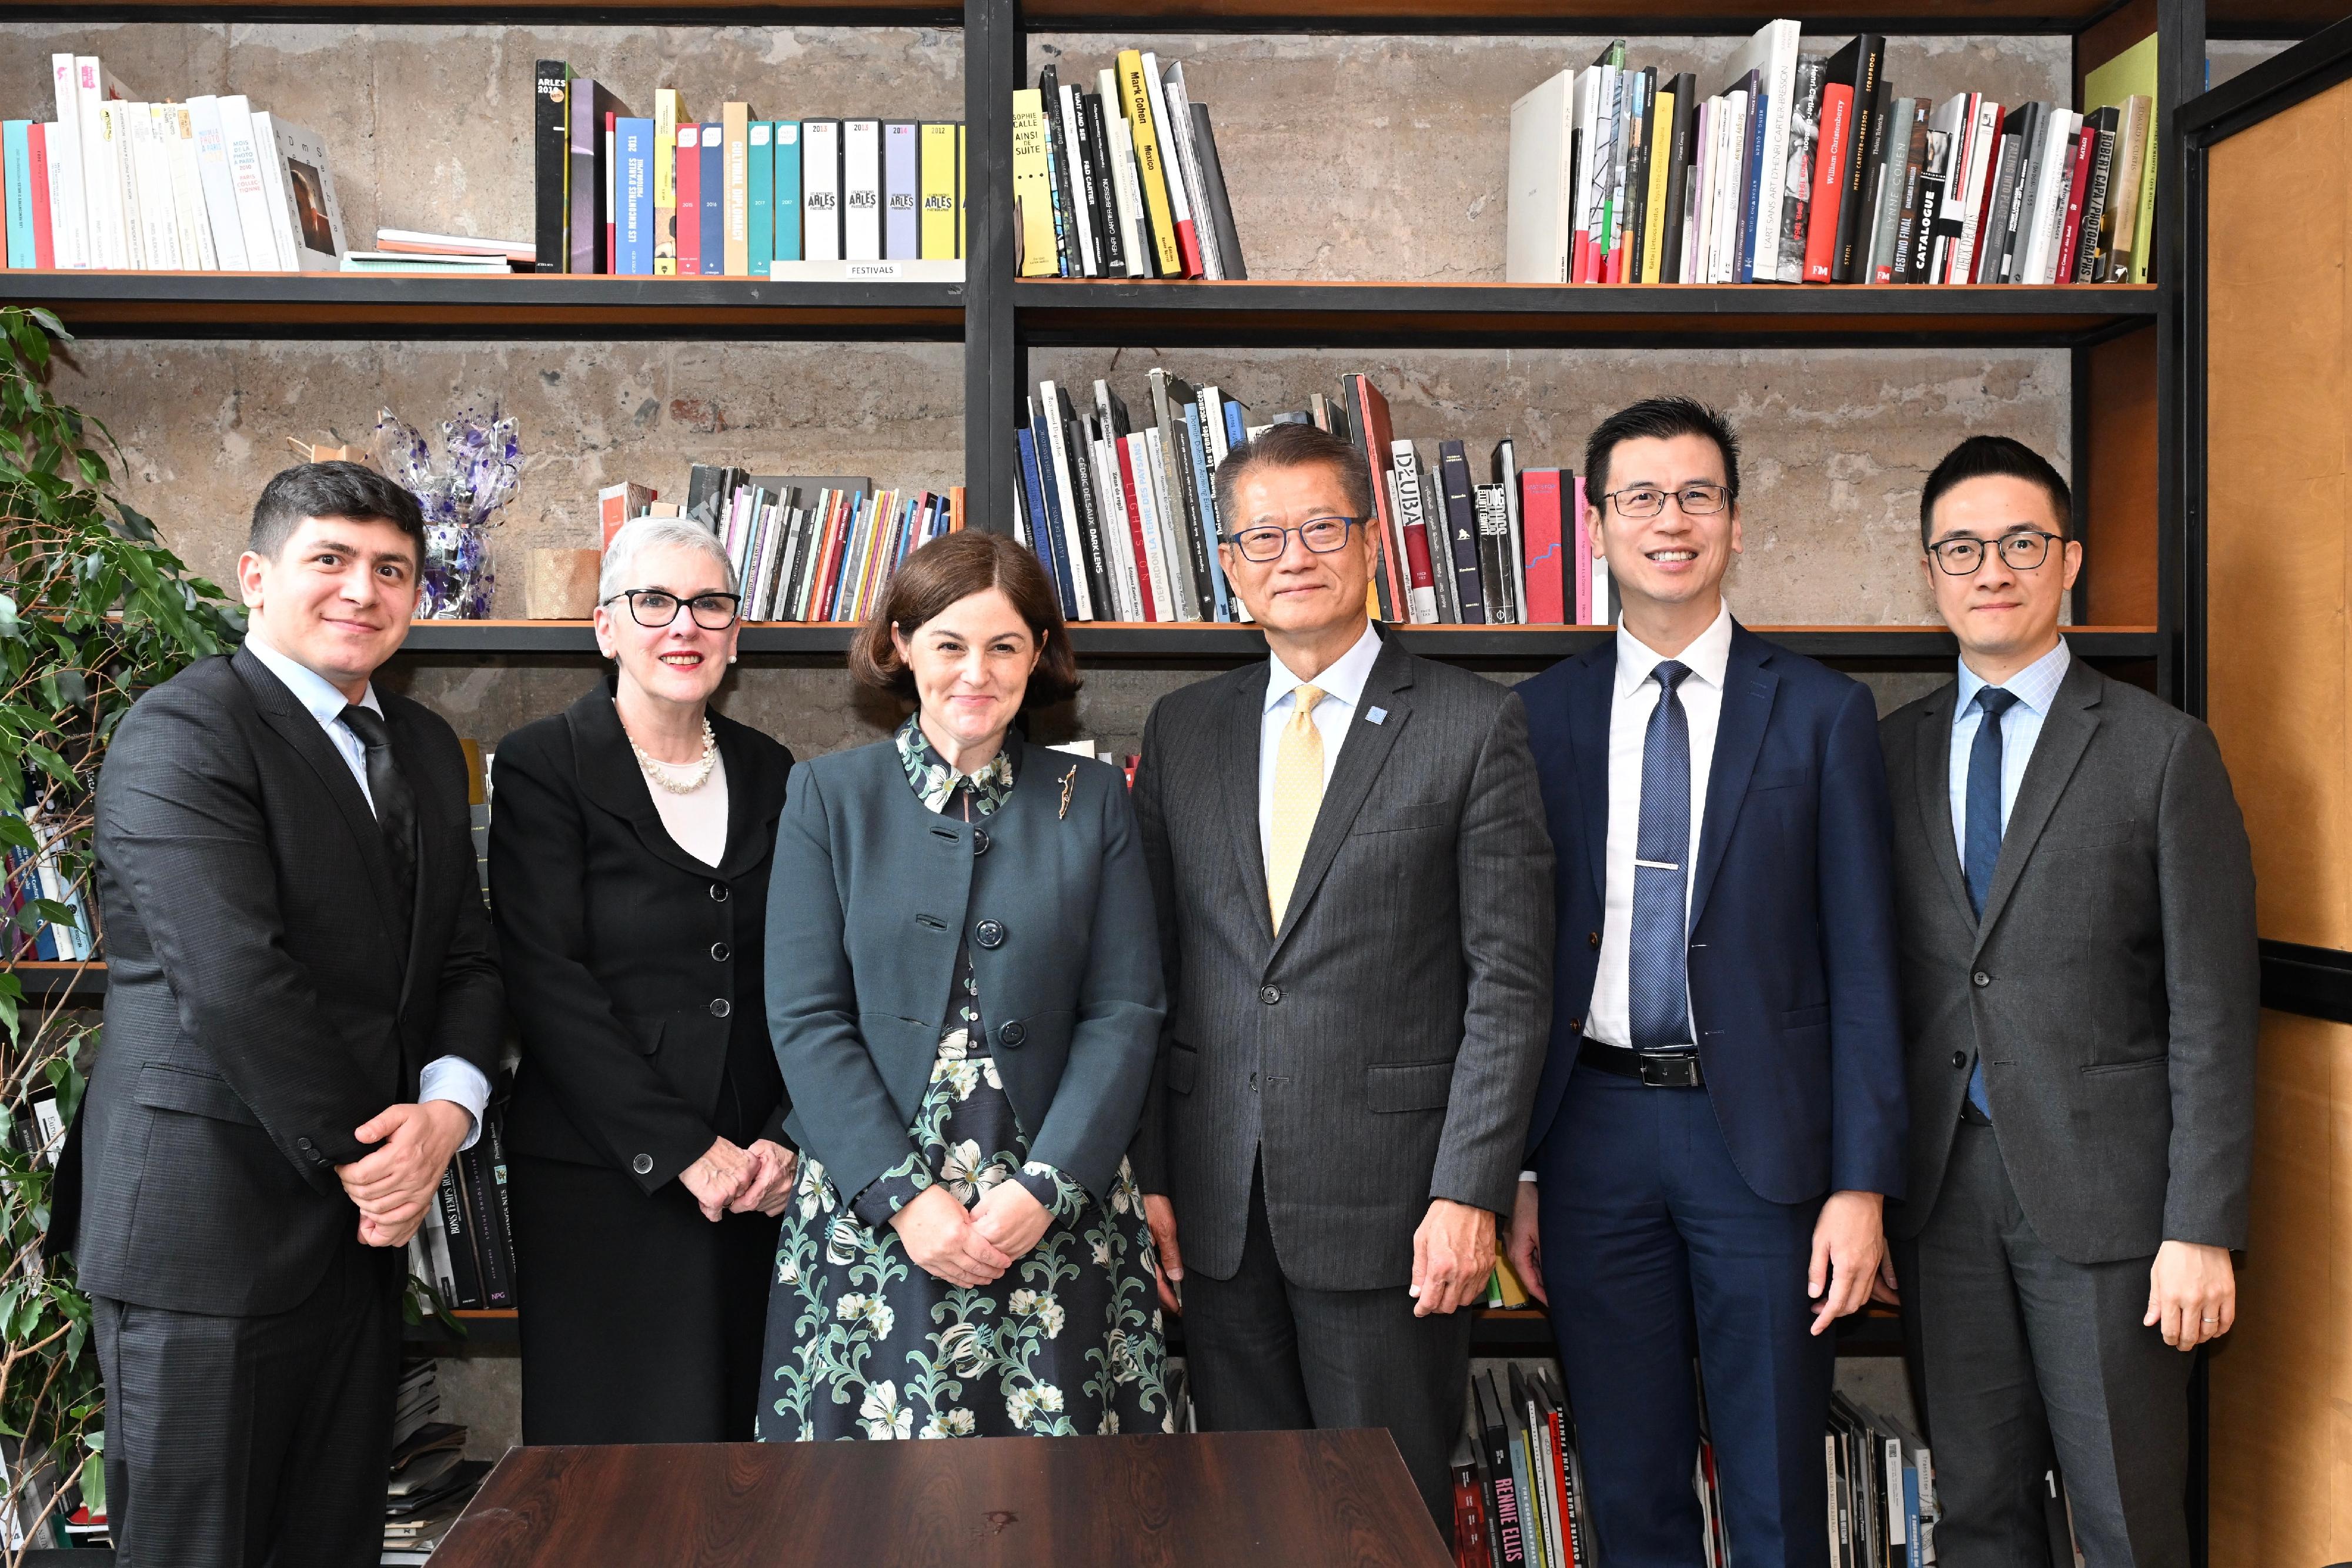 The Financial Secretary, Mr Paul Chan, continued his attendance yesterday (May 3, Tbilisi time) at the 57th Annual Meeting of the Board of Governors of the Asian Development Bank in Tbilisi, Georgia. Photo shows Mr Chan (third right) with Asian Development Bank Executive Director, Ms Rachel Thompson (third left) and Deputy Executive Director, Ms Lisa Wright (second left) after a meeting to discuss the strengthening of bilateral cooperation.